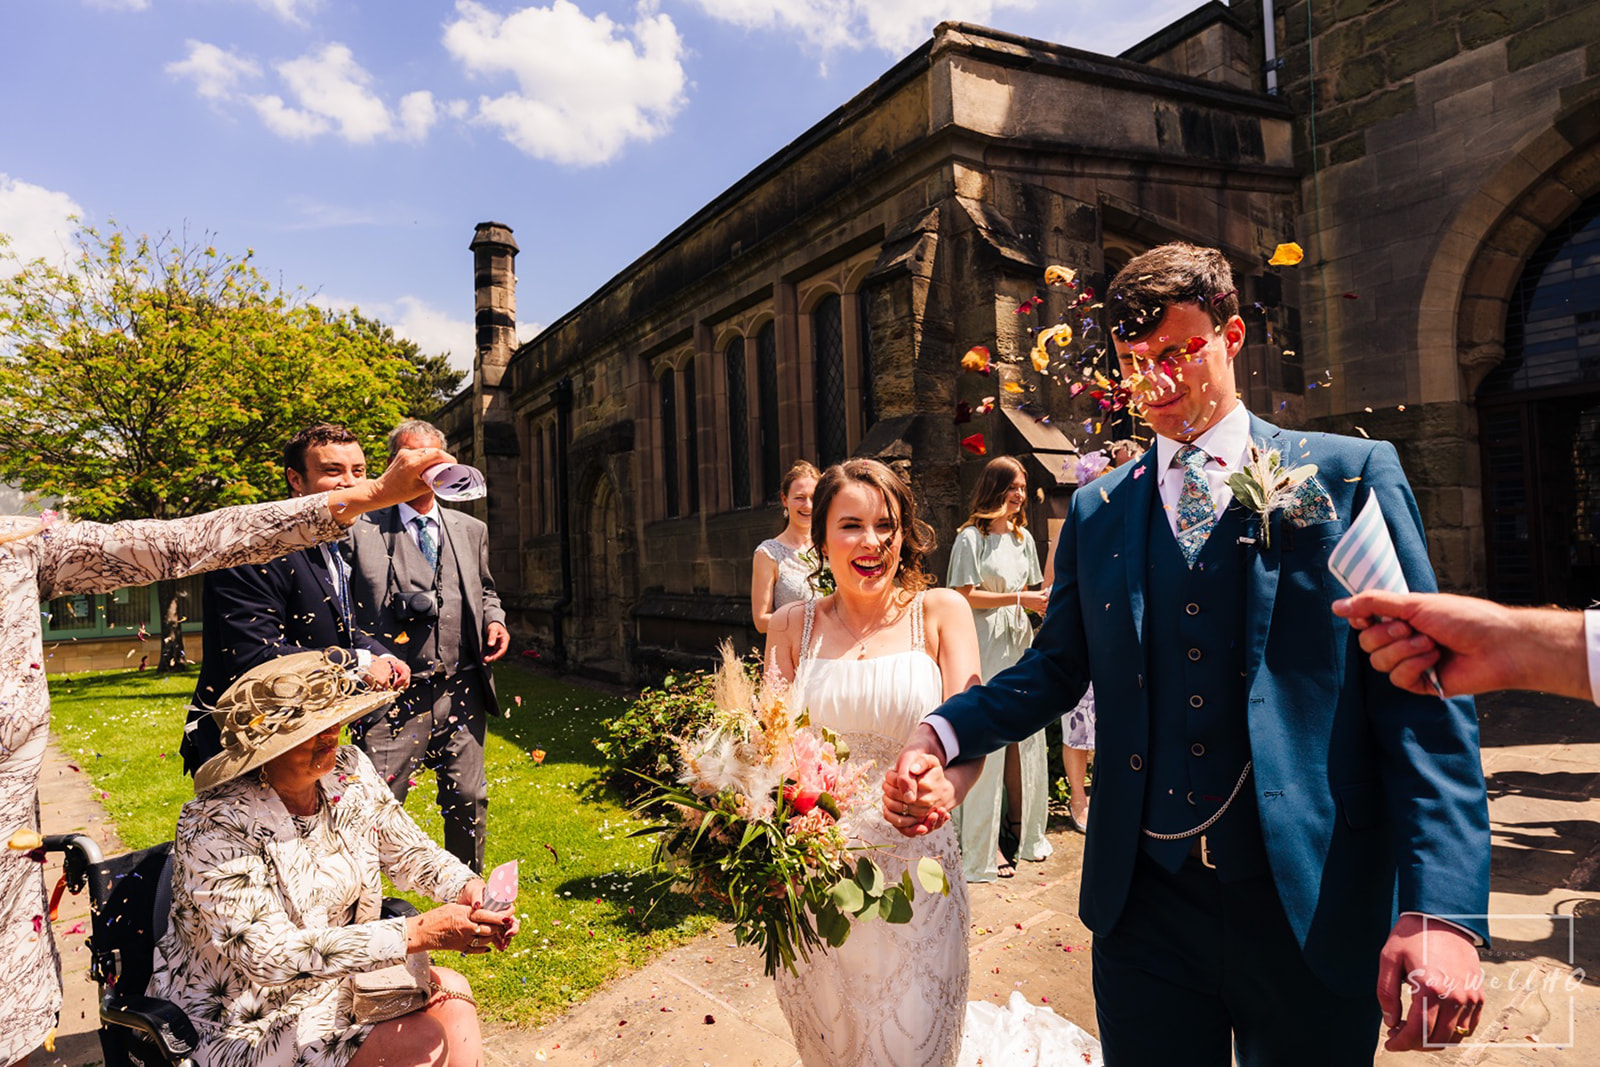 Documentary Wedding Photography Portfolio - Andy Saywell - bride and groom getting covered in confetti